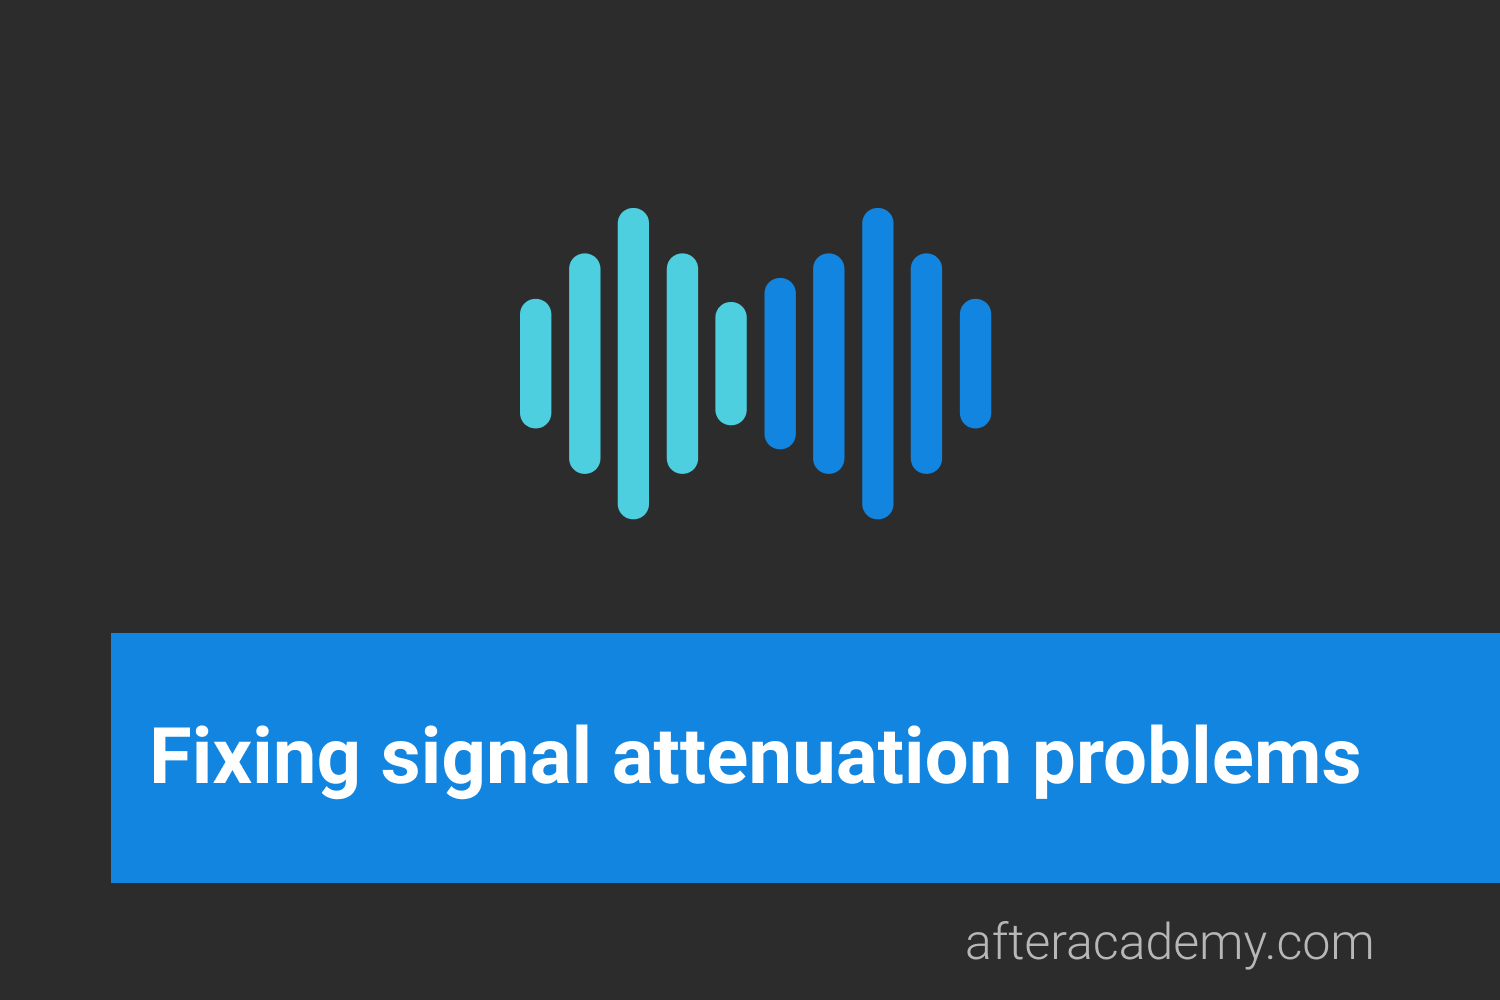 What can be done to fix signal attenuation problems?